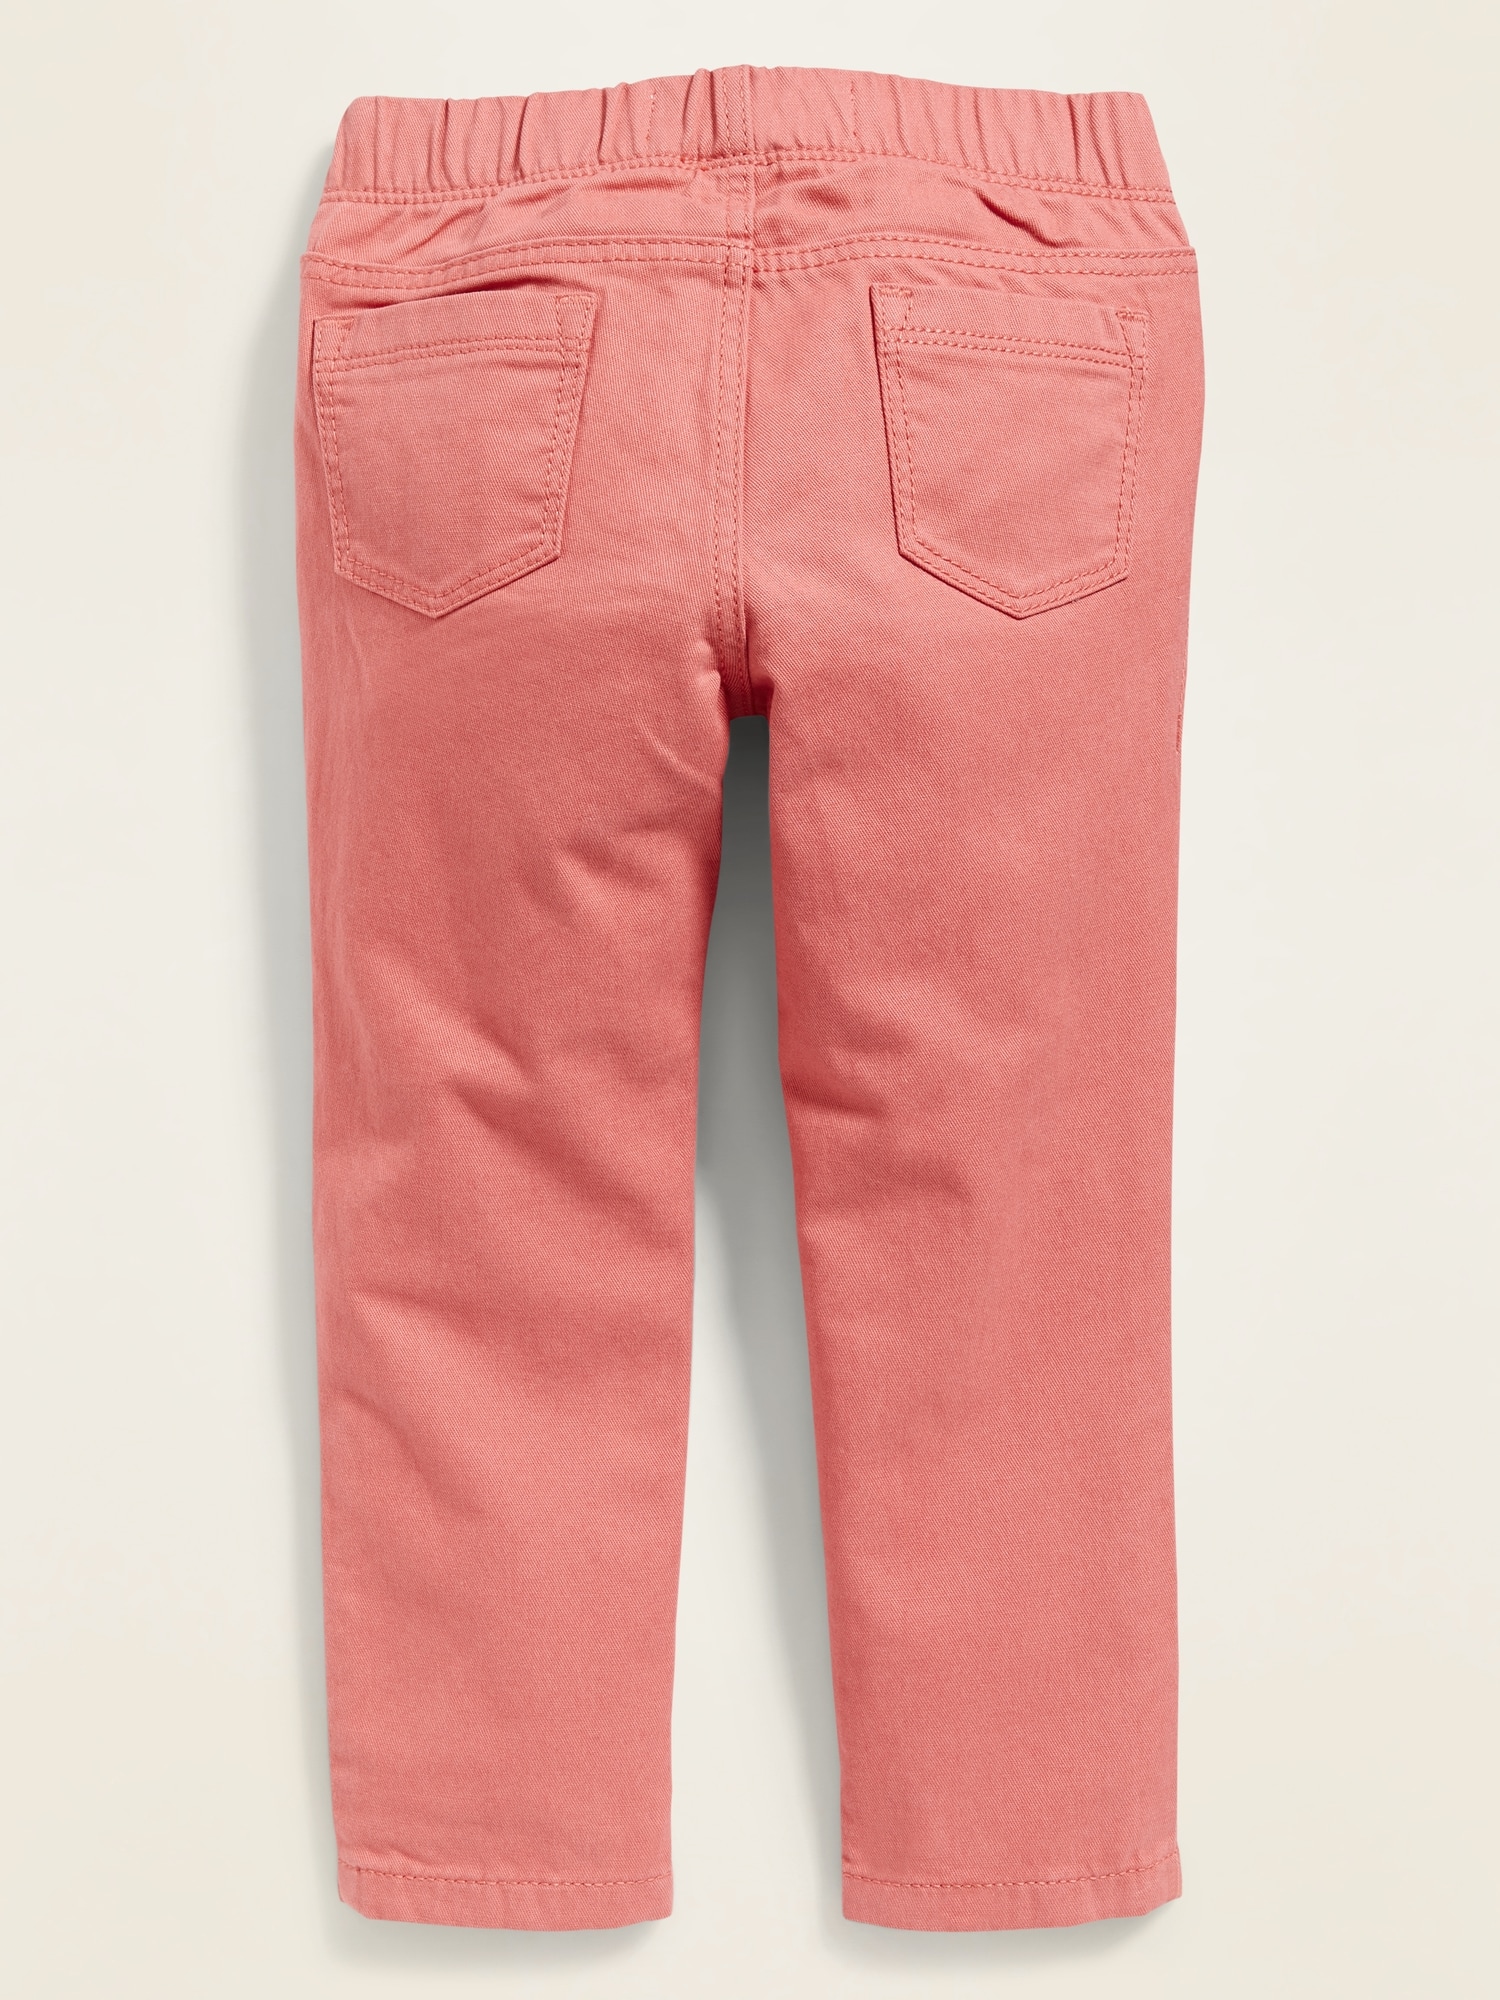 red jeans old navy